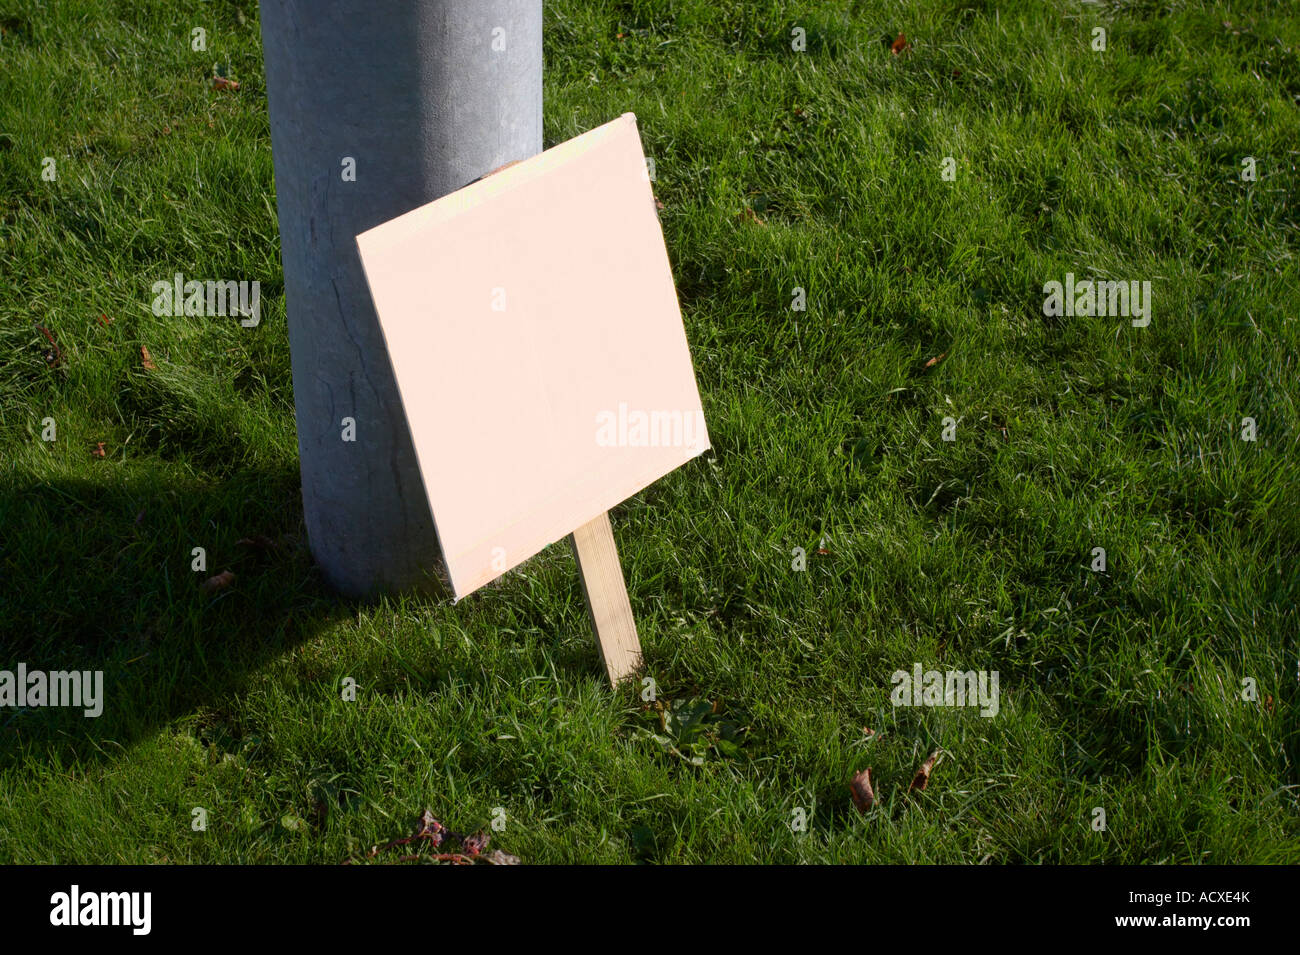 Empty demonstration placard leaning to a metal post on a green grassy background Stock Photo